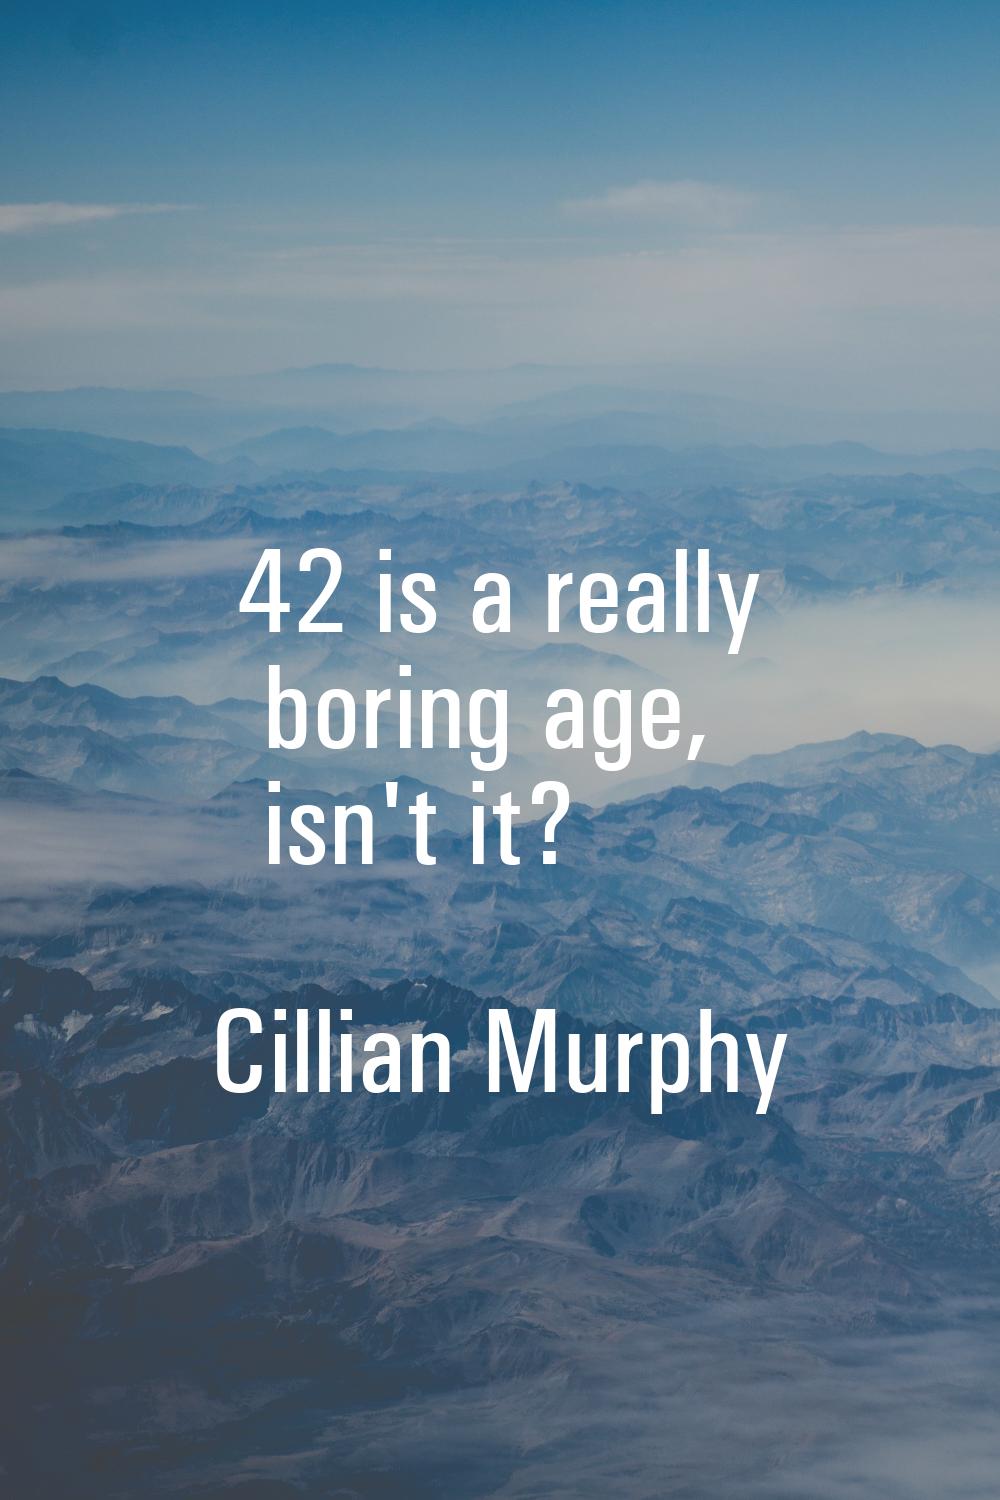 42 is a really boring age, isn't it?